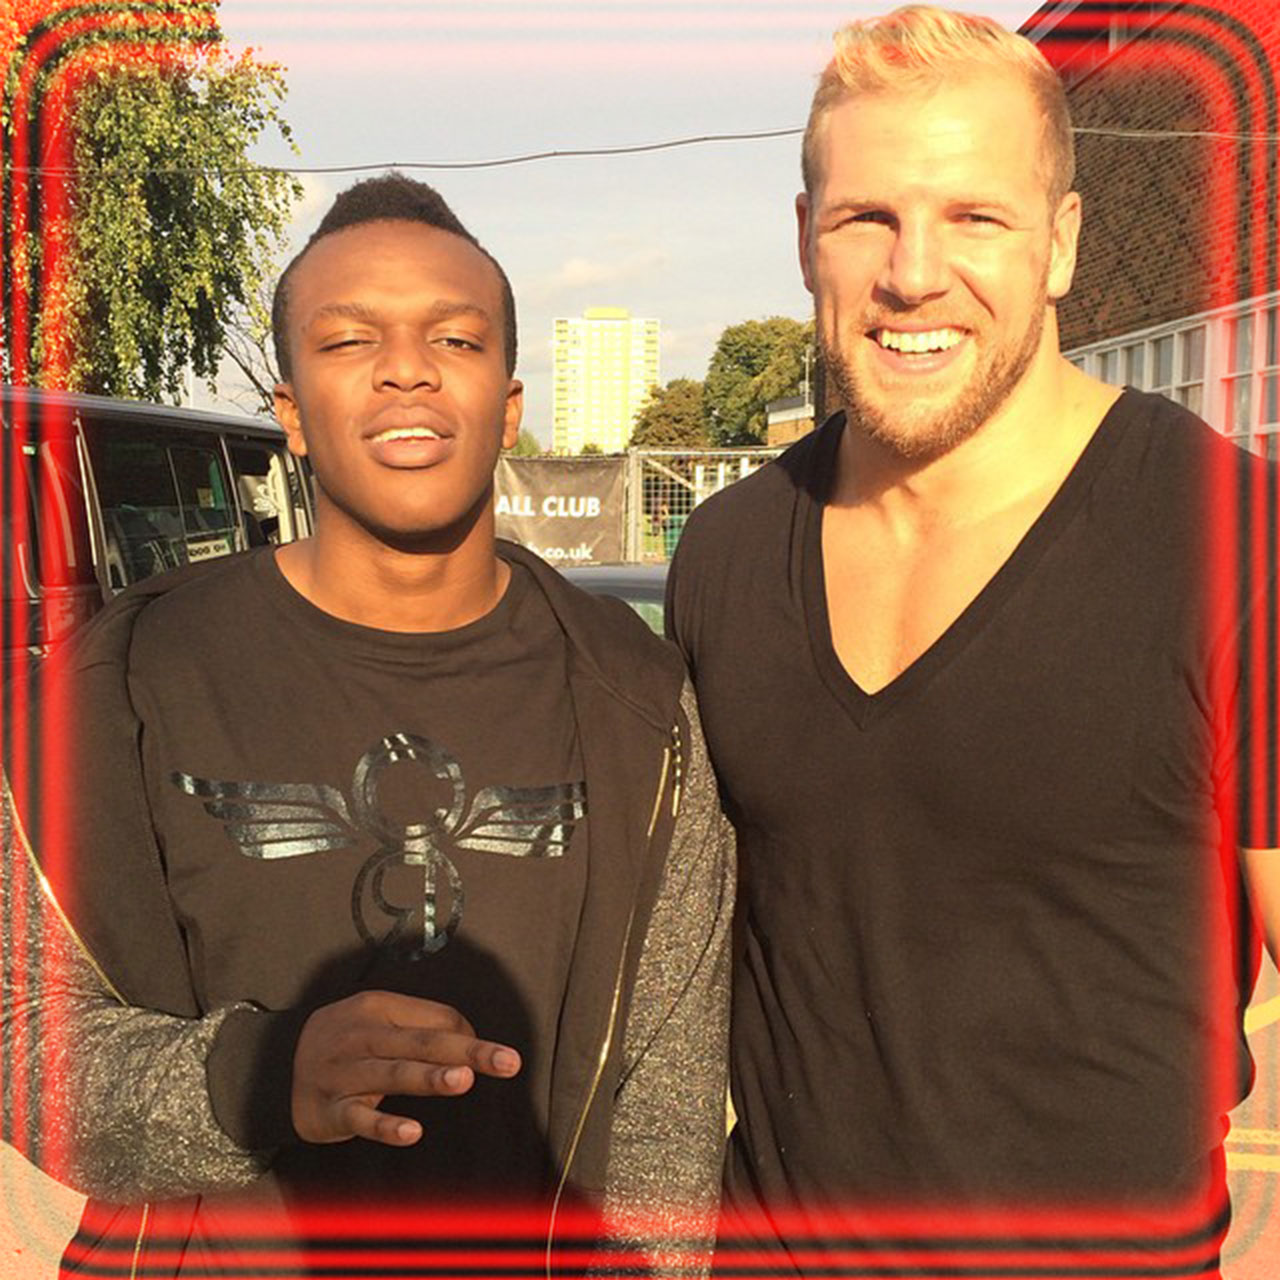 KSI gets trained in rugby by London Wasps flanker James Haskell